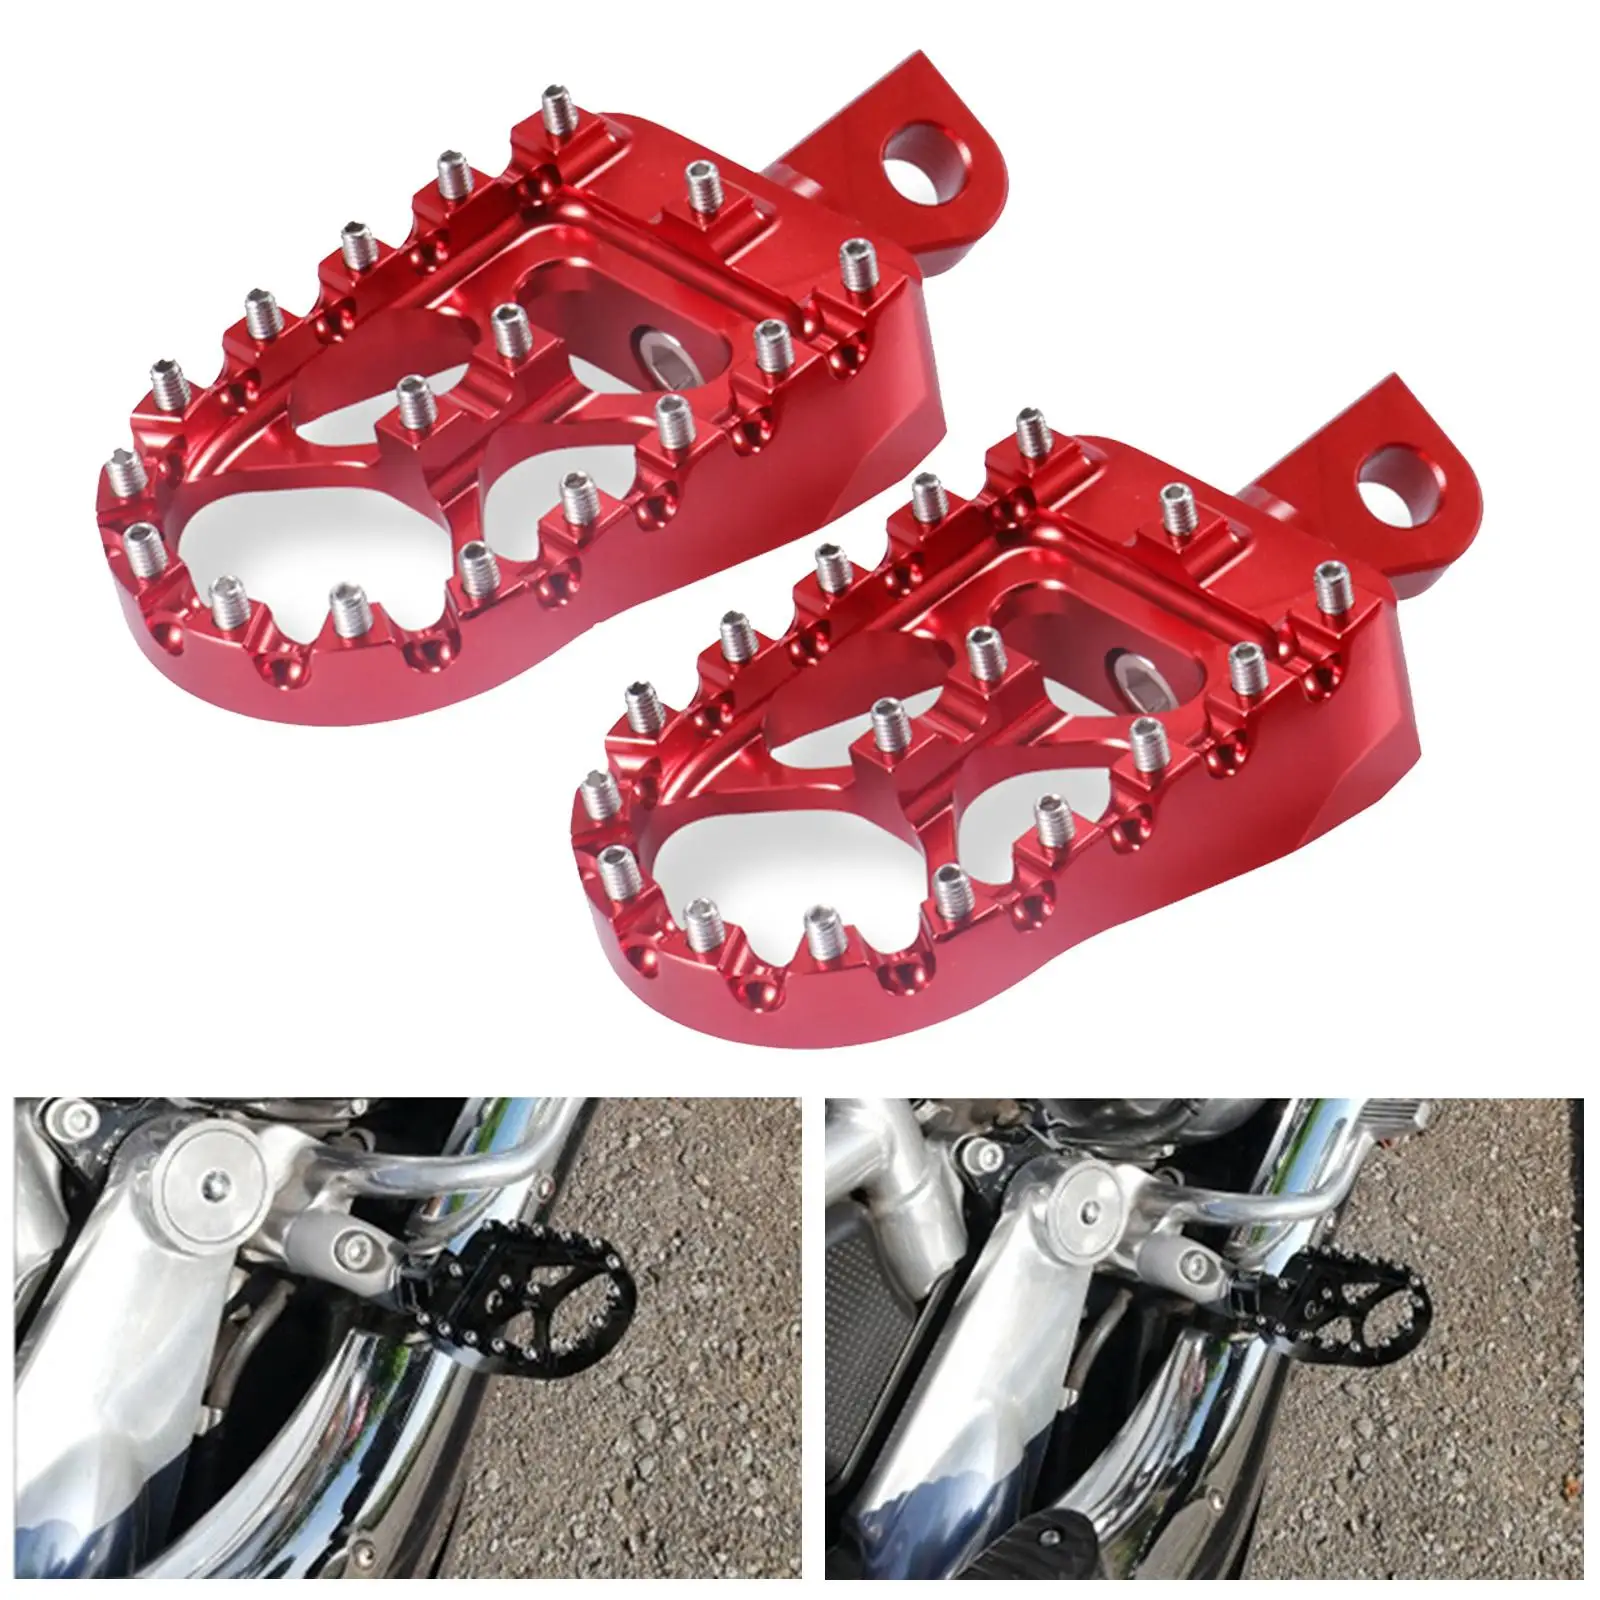 Motorcycle Refit Front Driver Footrests Footpegs Foot Pegs for  XL883XL883CXL883R00C, 00R, 007-2010